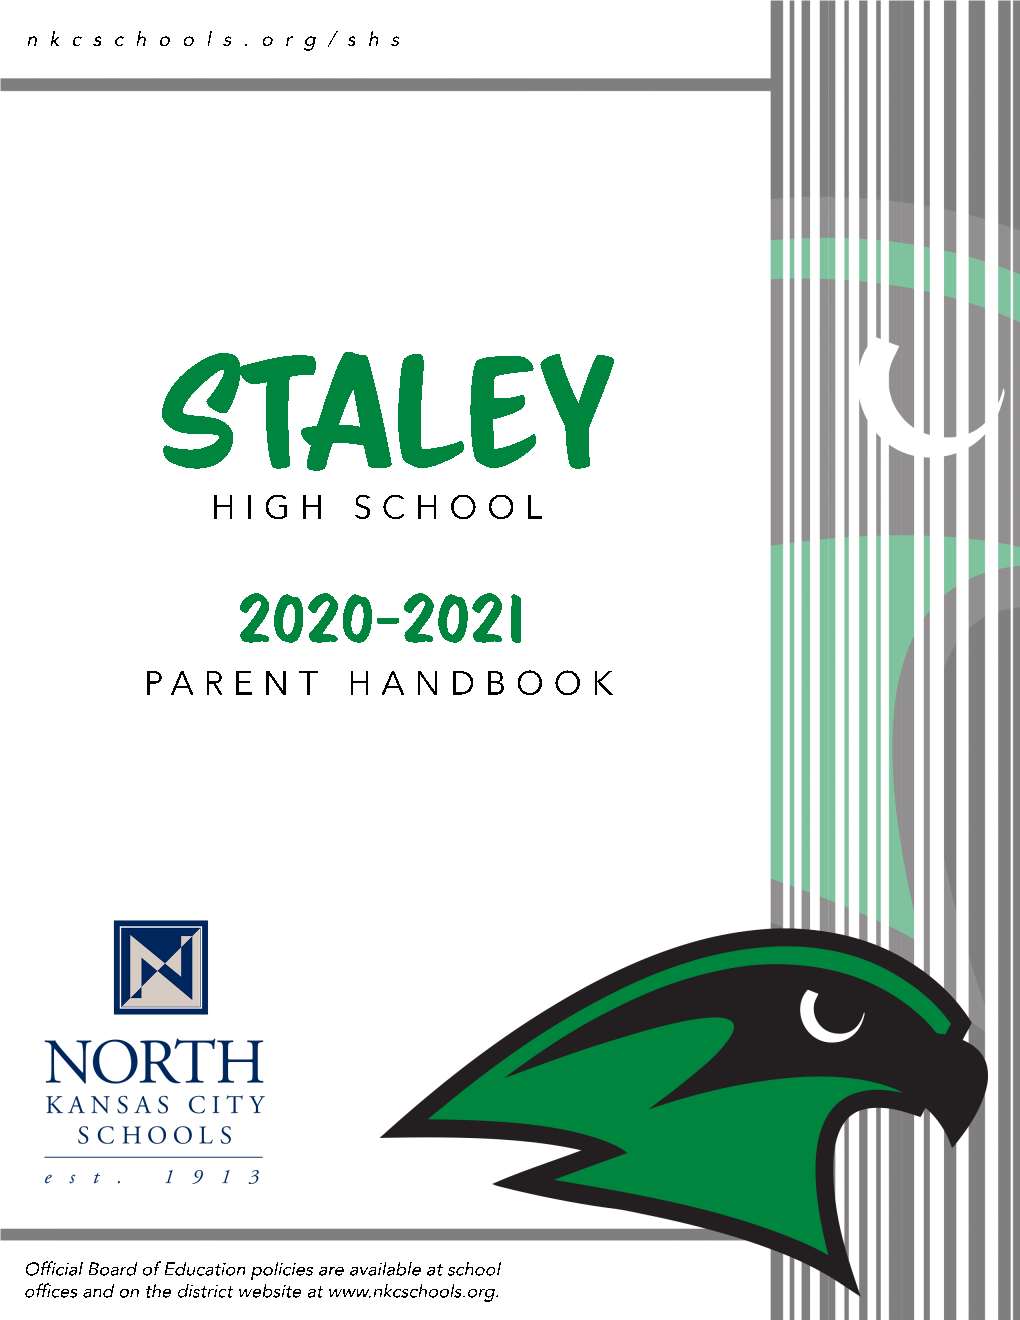 Our Staley High School Family Proudly Serving Yours! Welcome to the 2020-2021 School Year